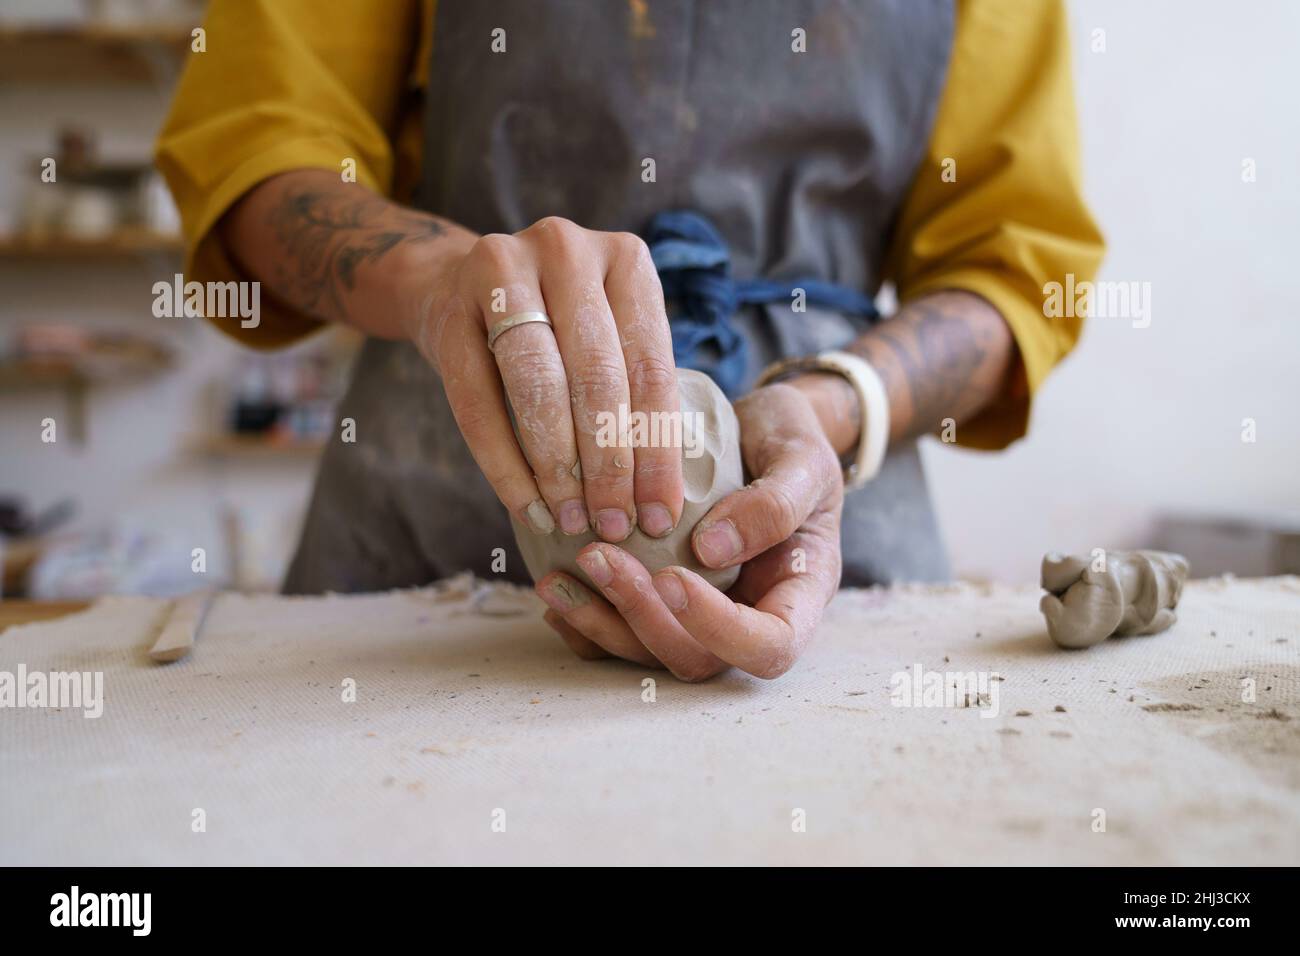 Work with your hands: artist female molding raw clay for sculpturing and shaping pottery or ceramics Stock Photo